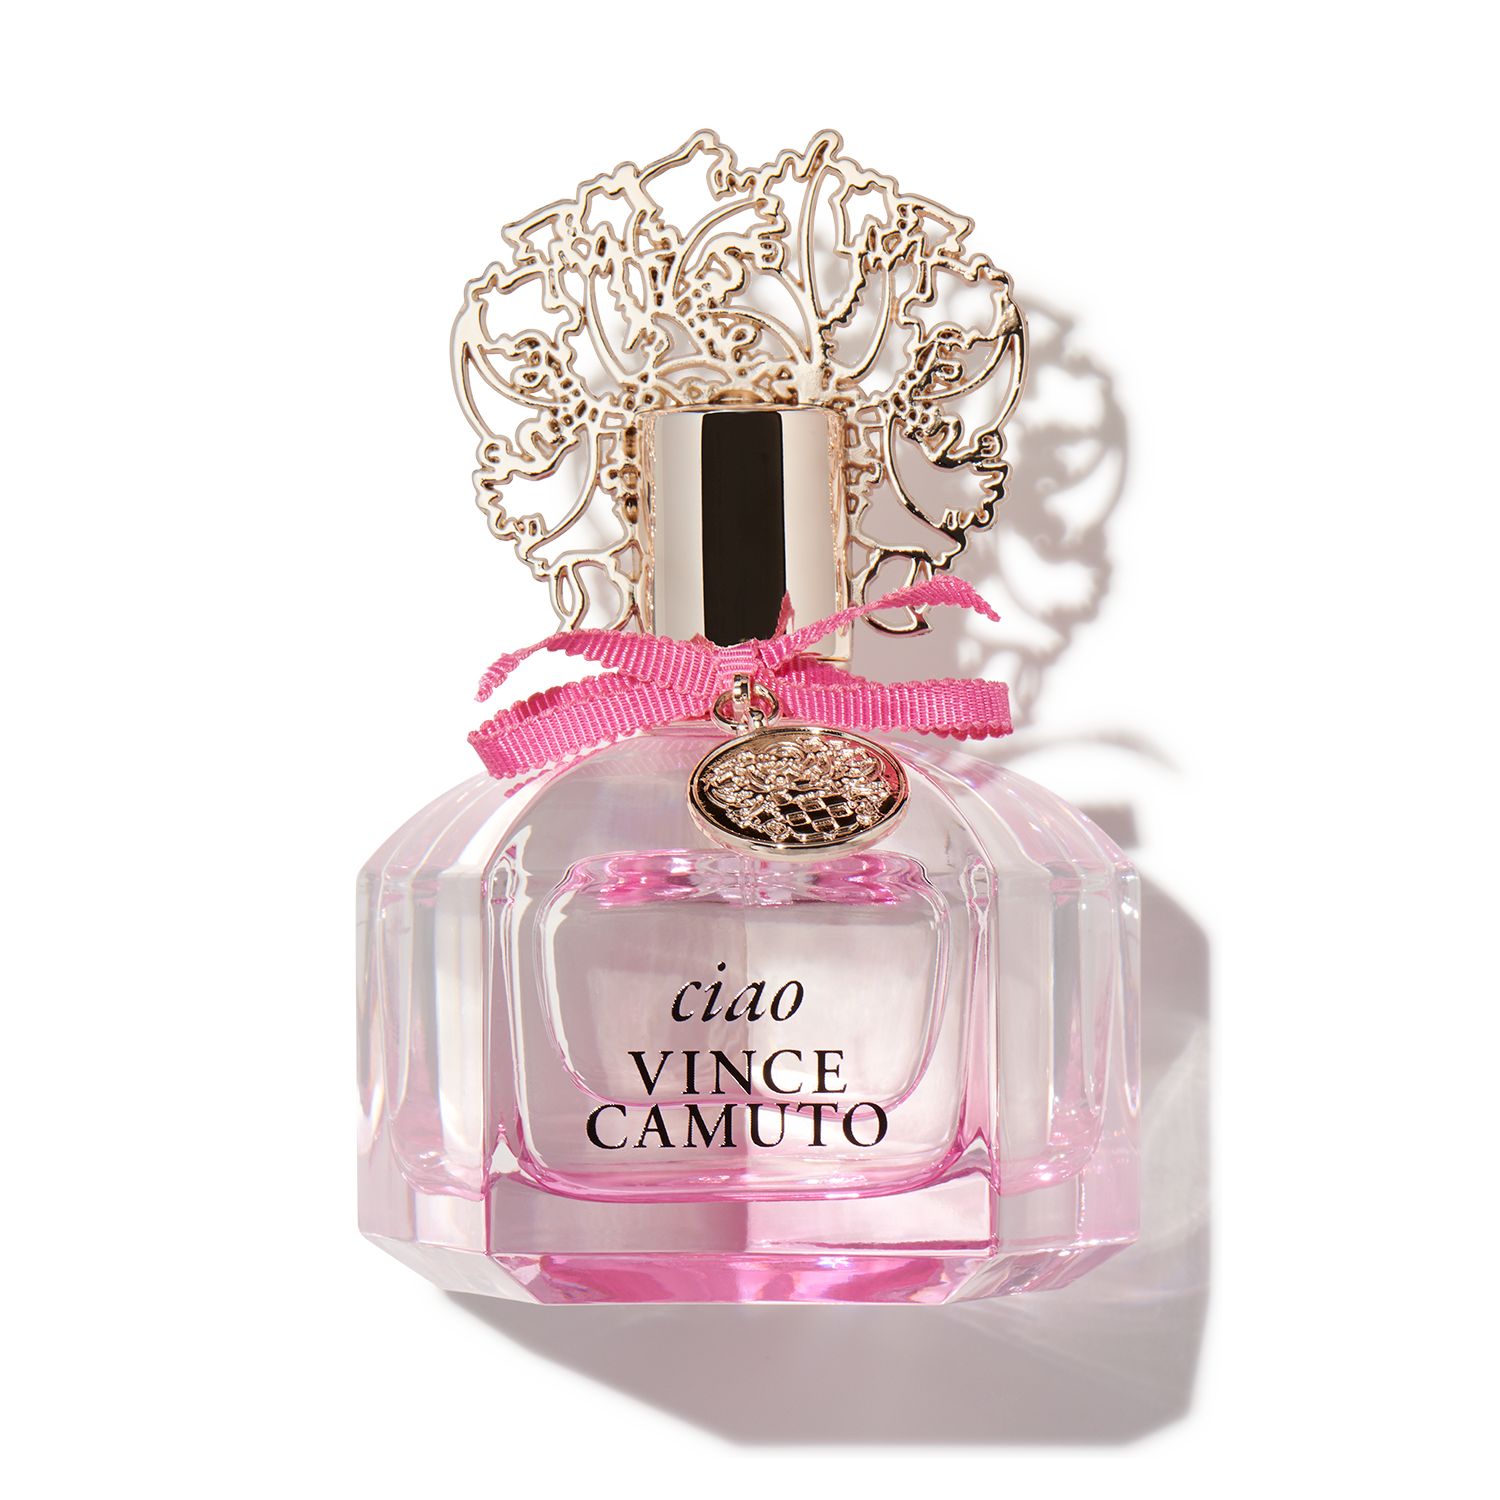 Try The Breathtaking Vince Camuto Perfume Collection